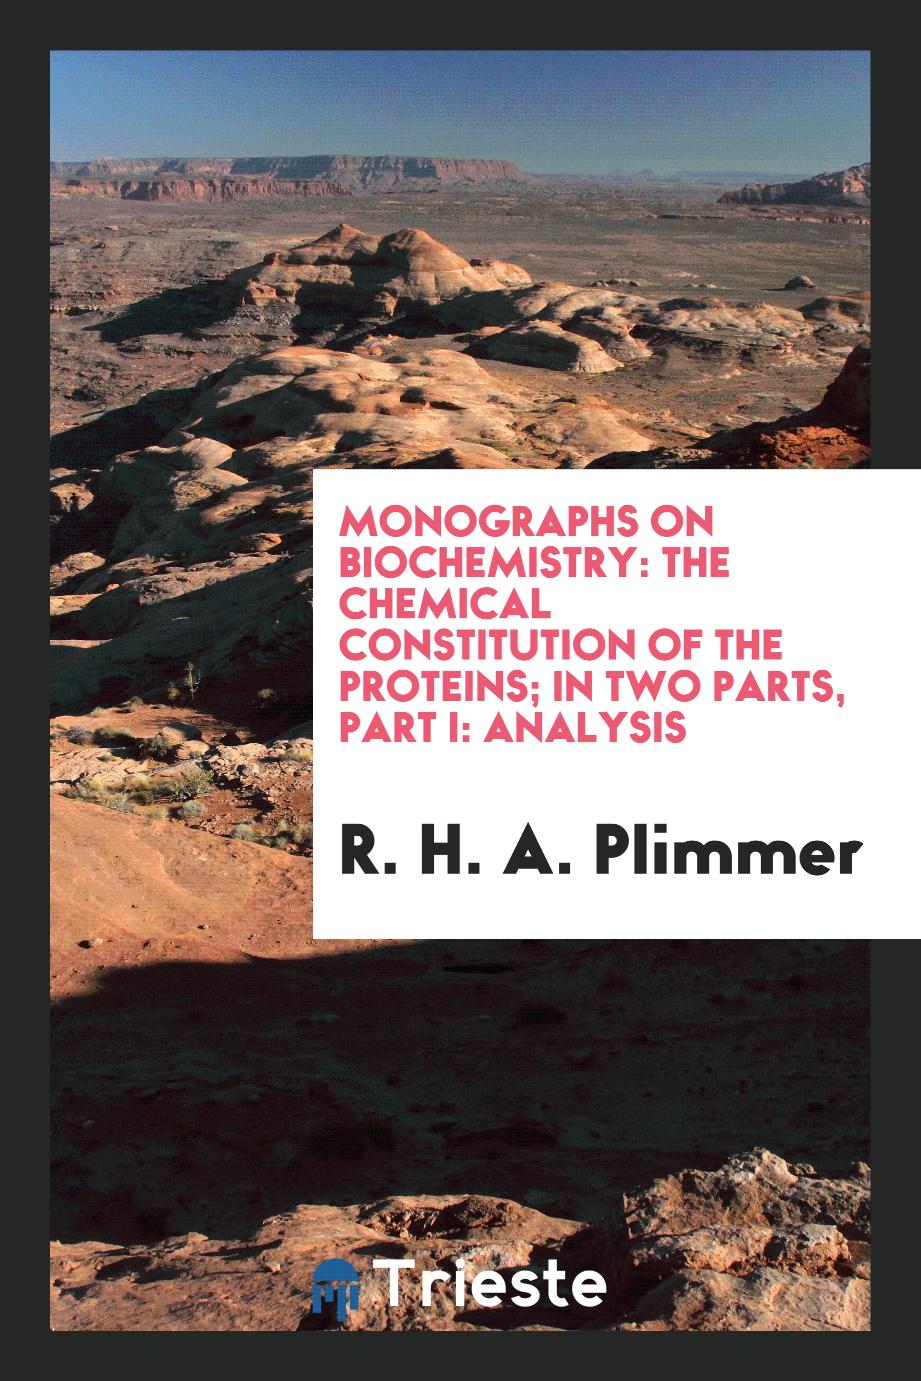 Monographs on Biochemistry: The Chemical Constitution of the Proteins; In Two Parts, Part I: Analysis